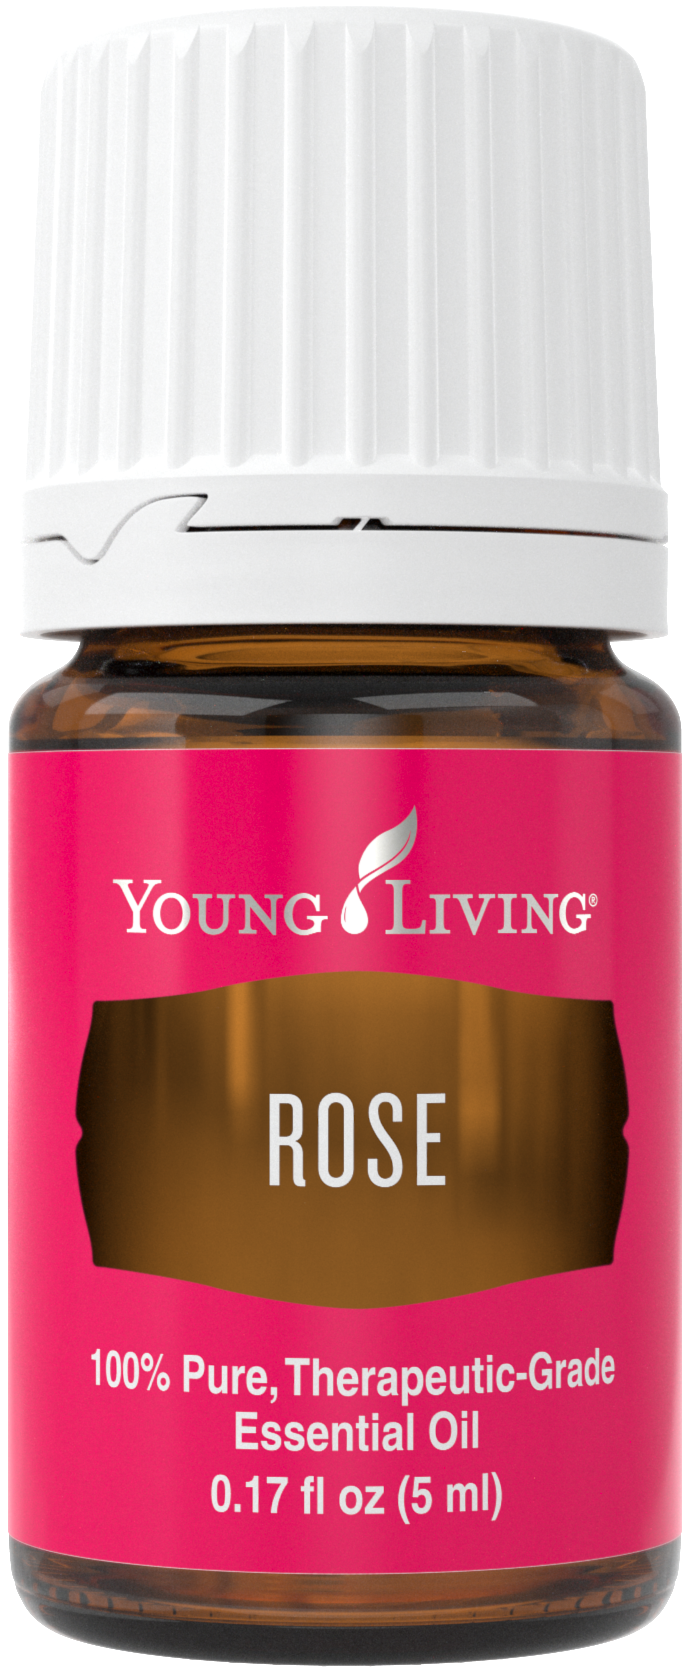 Rose 5ml Silo.png